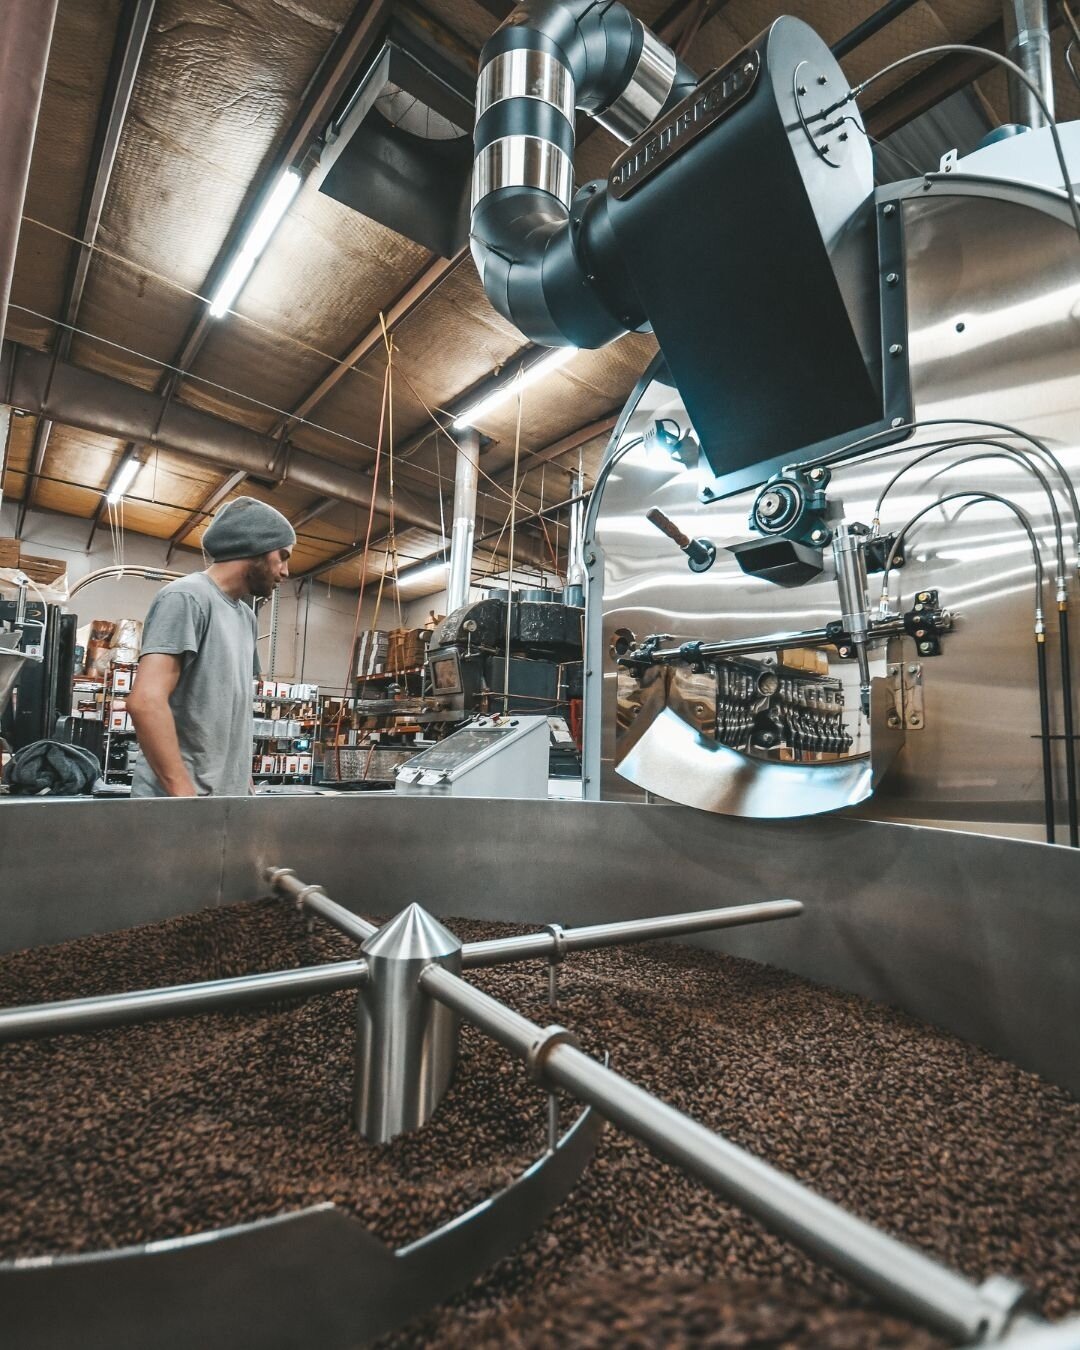 Support your local coffee scene with Coda Coffee's locally roasted brews! 🌟 Experience the rich flavors and unmatched quality of coffee roasted right here in Denver, Colorado. ☕ ⁠
⁠
⁠
⁠
⁠
⁠